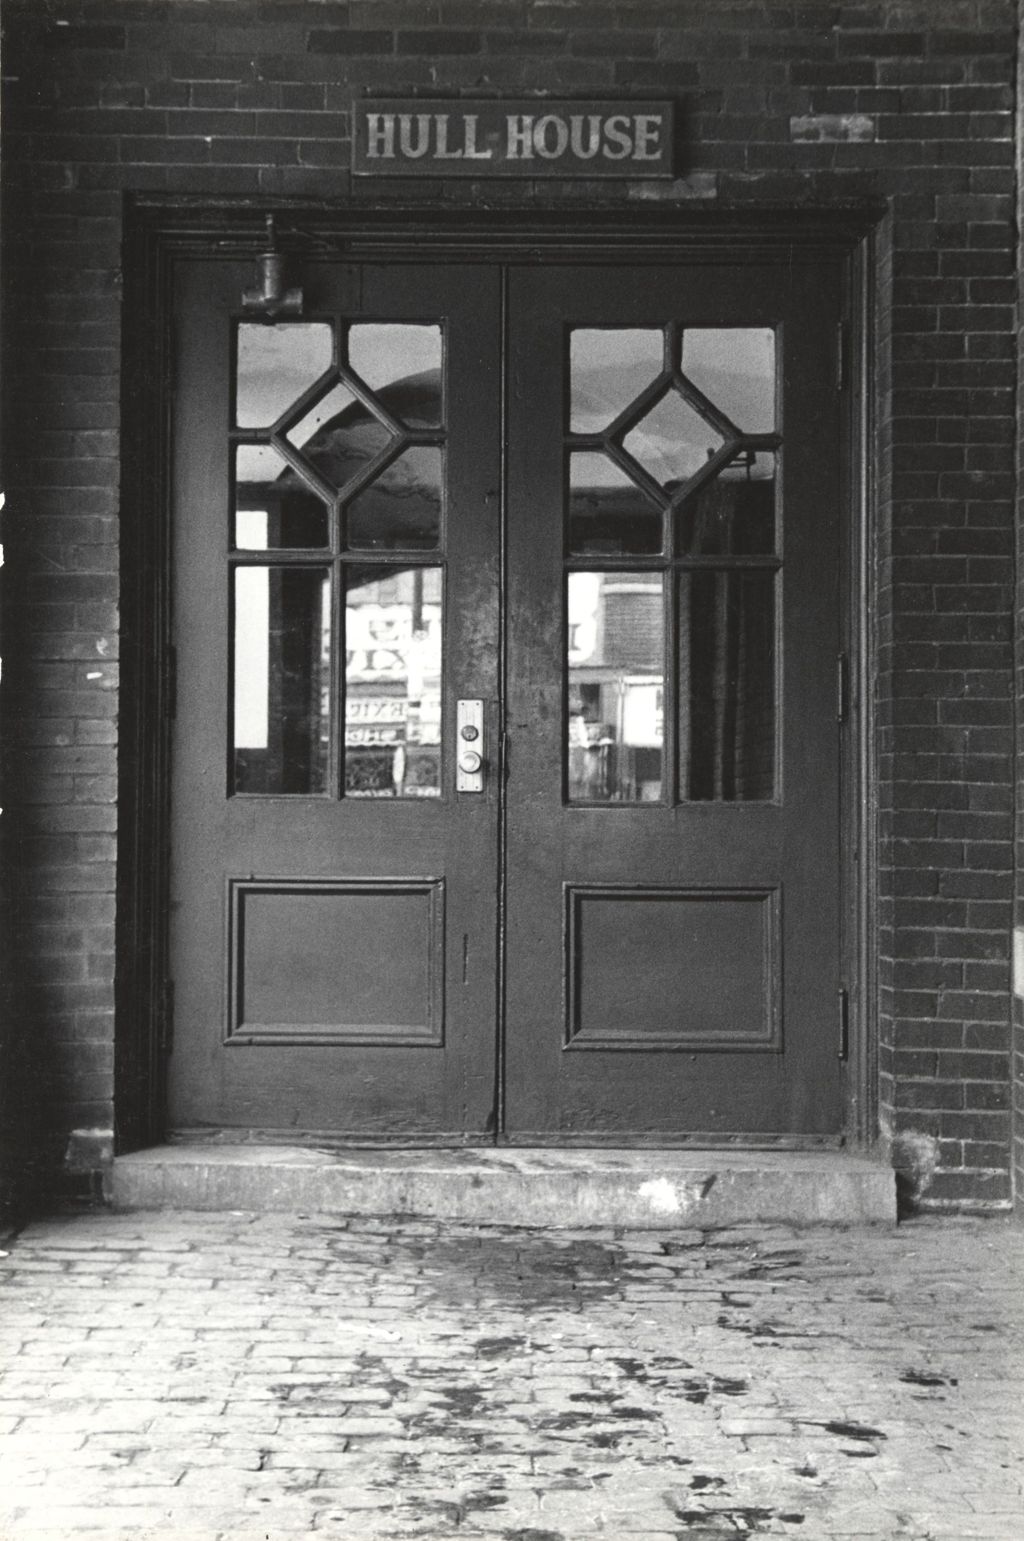 Miniature of Doorway at entrance of Hull Mansion with doors closed